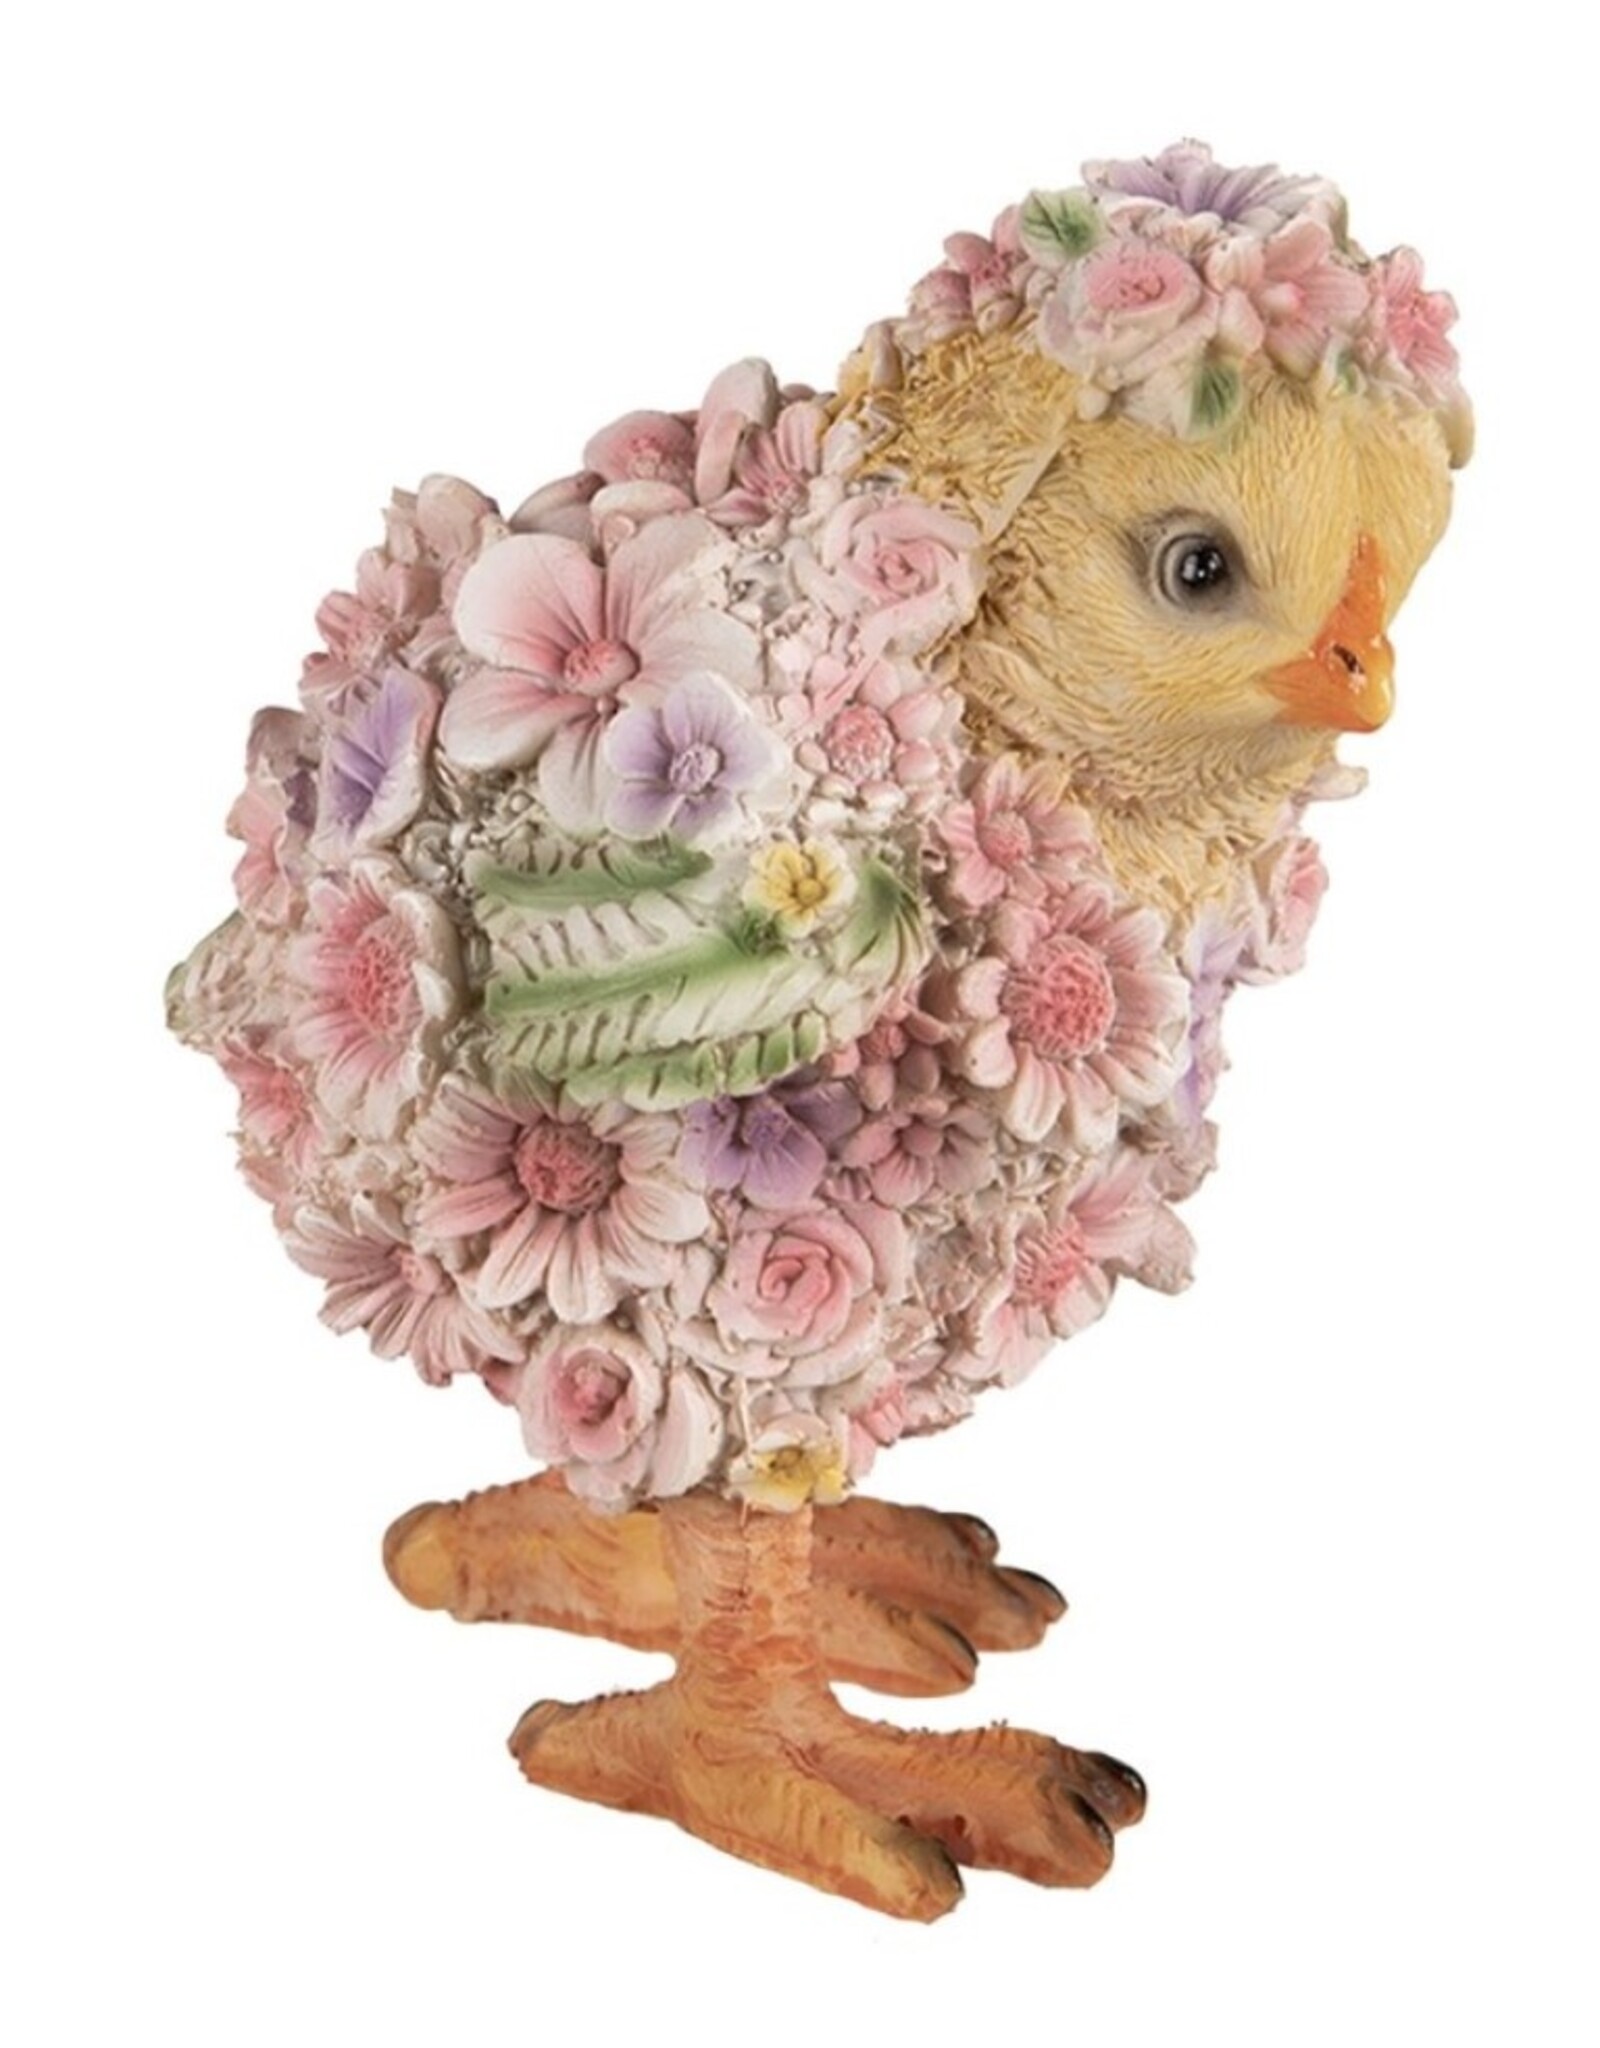 C&E Giftware & Lifestyle - Chick Decorated with Flowers figurine